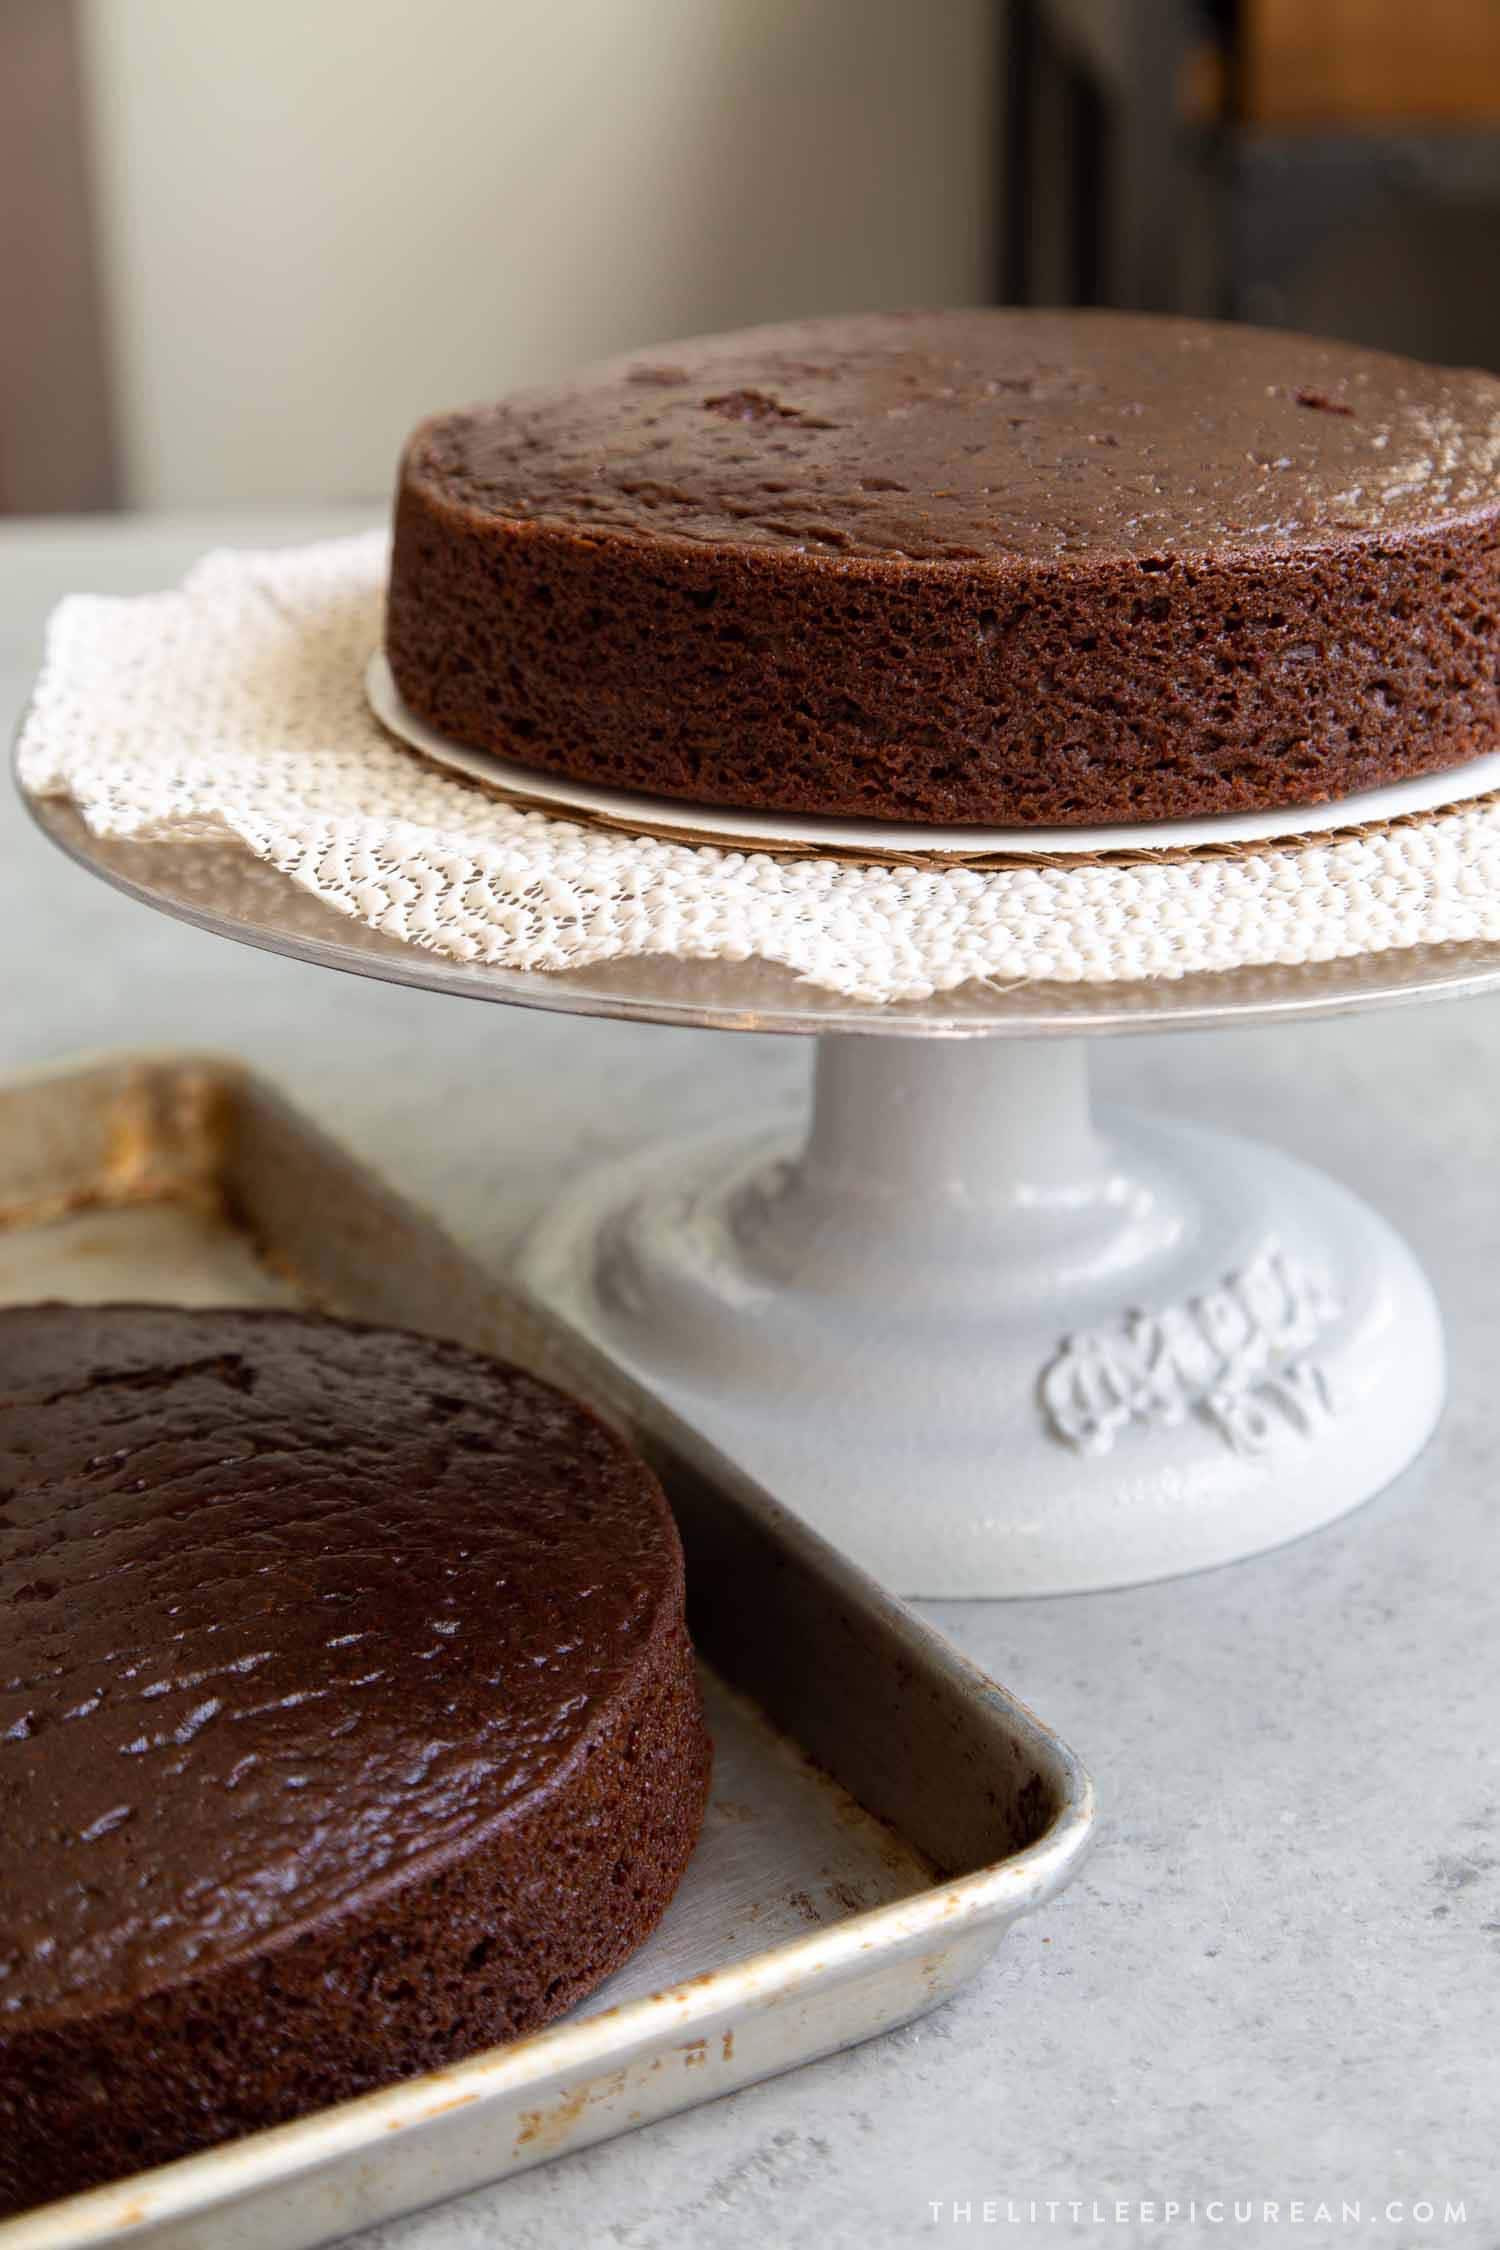 This classic chocolate cake recipe makes two 8-inch cake layers or three 6-inch cake layers. The cake layer bake flat.